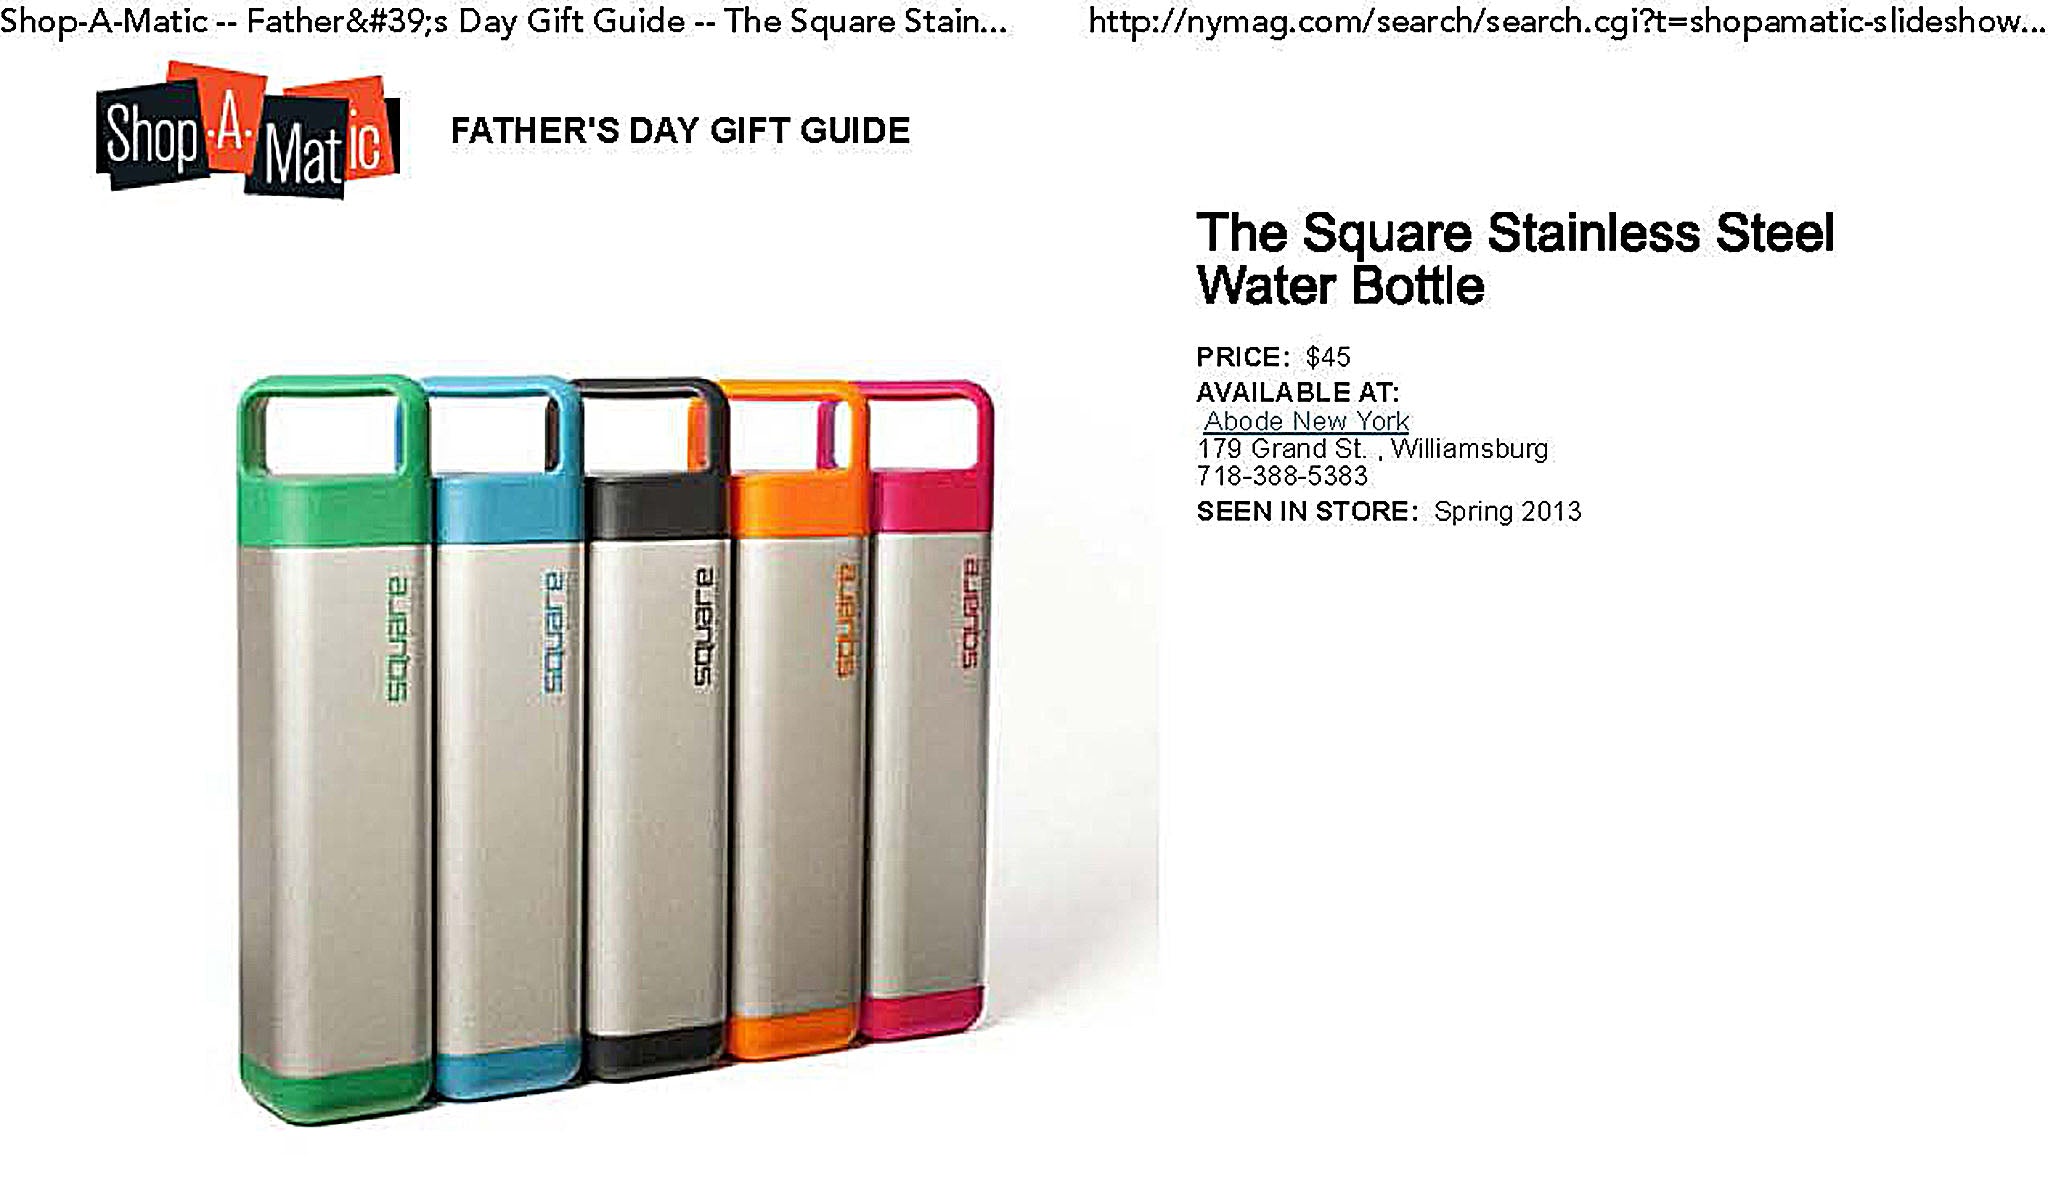 The Square Water Bottle by Clean Bottle. New York Magazine 2013 Father's Day  Shop-a-Matic Father’s Day Gift Guide.